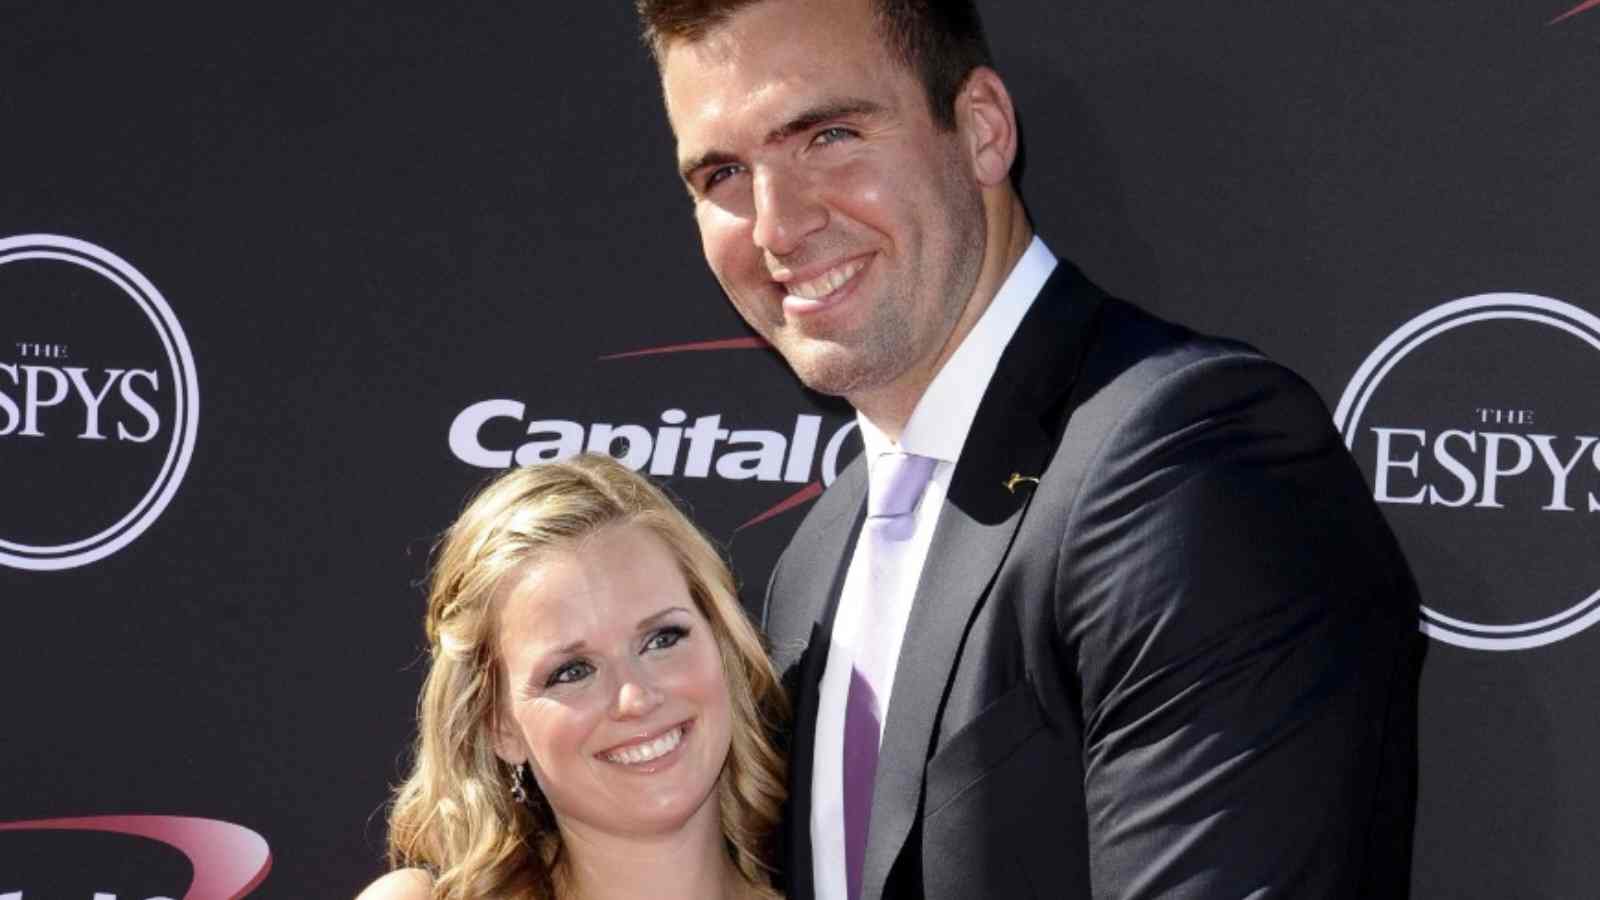 Dana Grady and her husband Joe Flacco at an event with a big smile on their faces